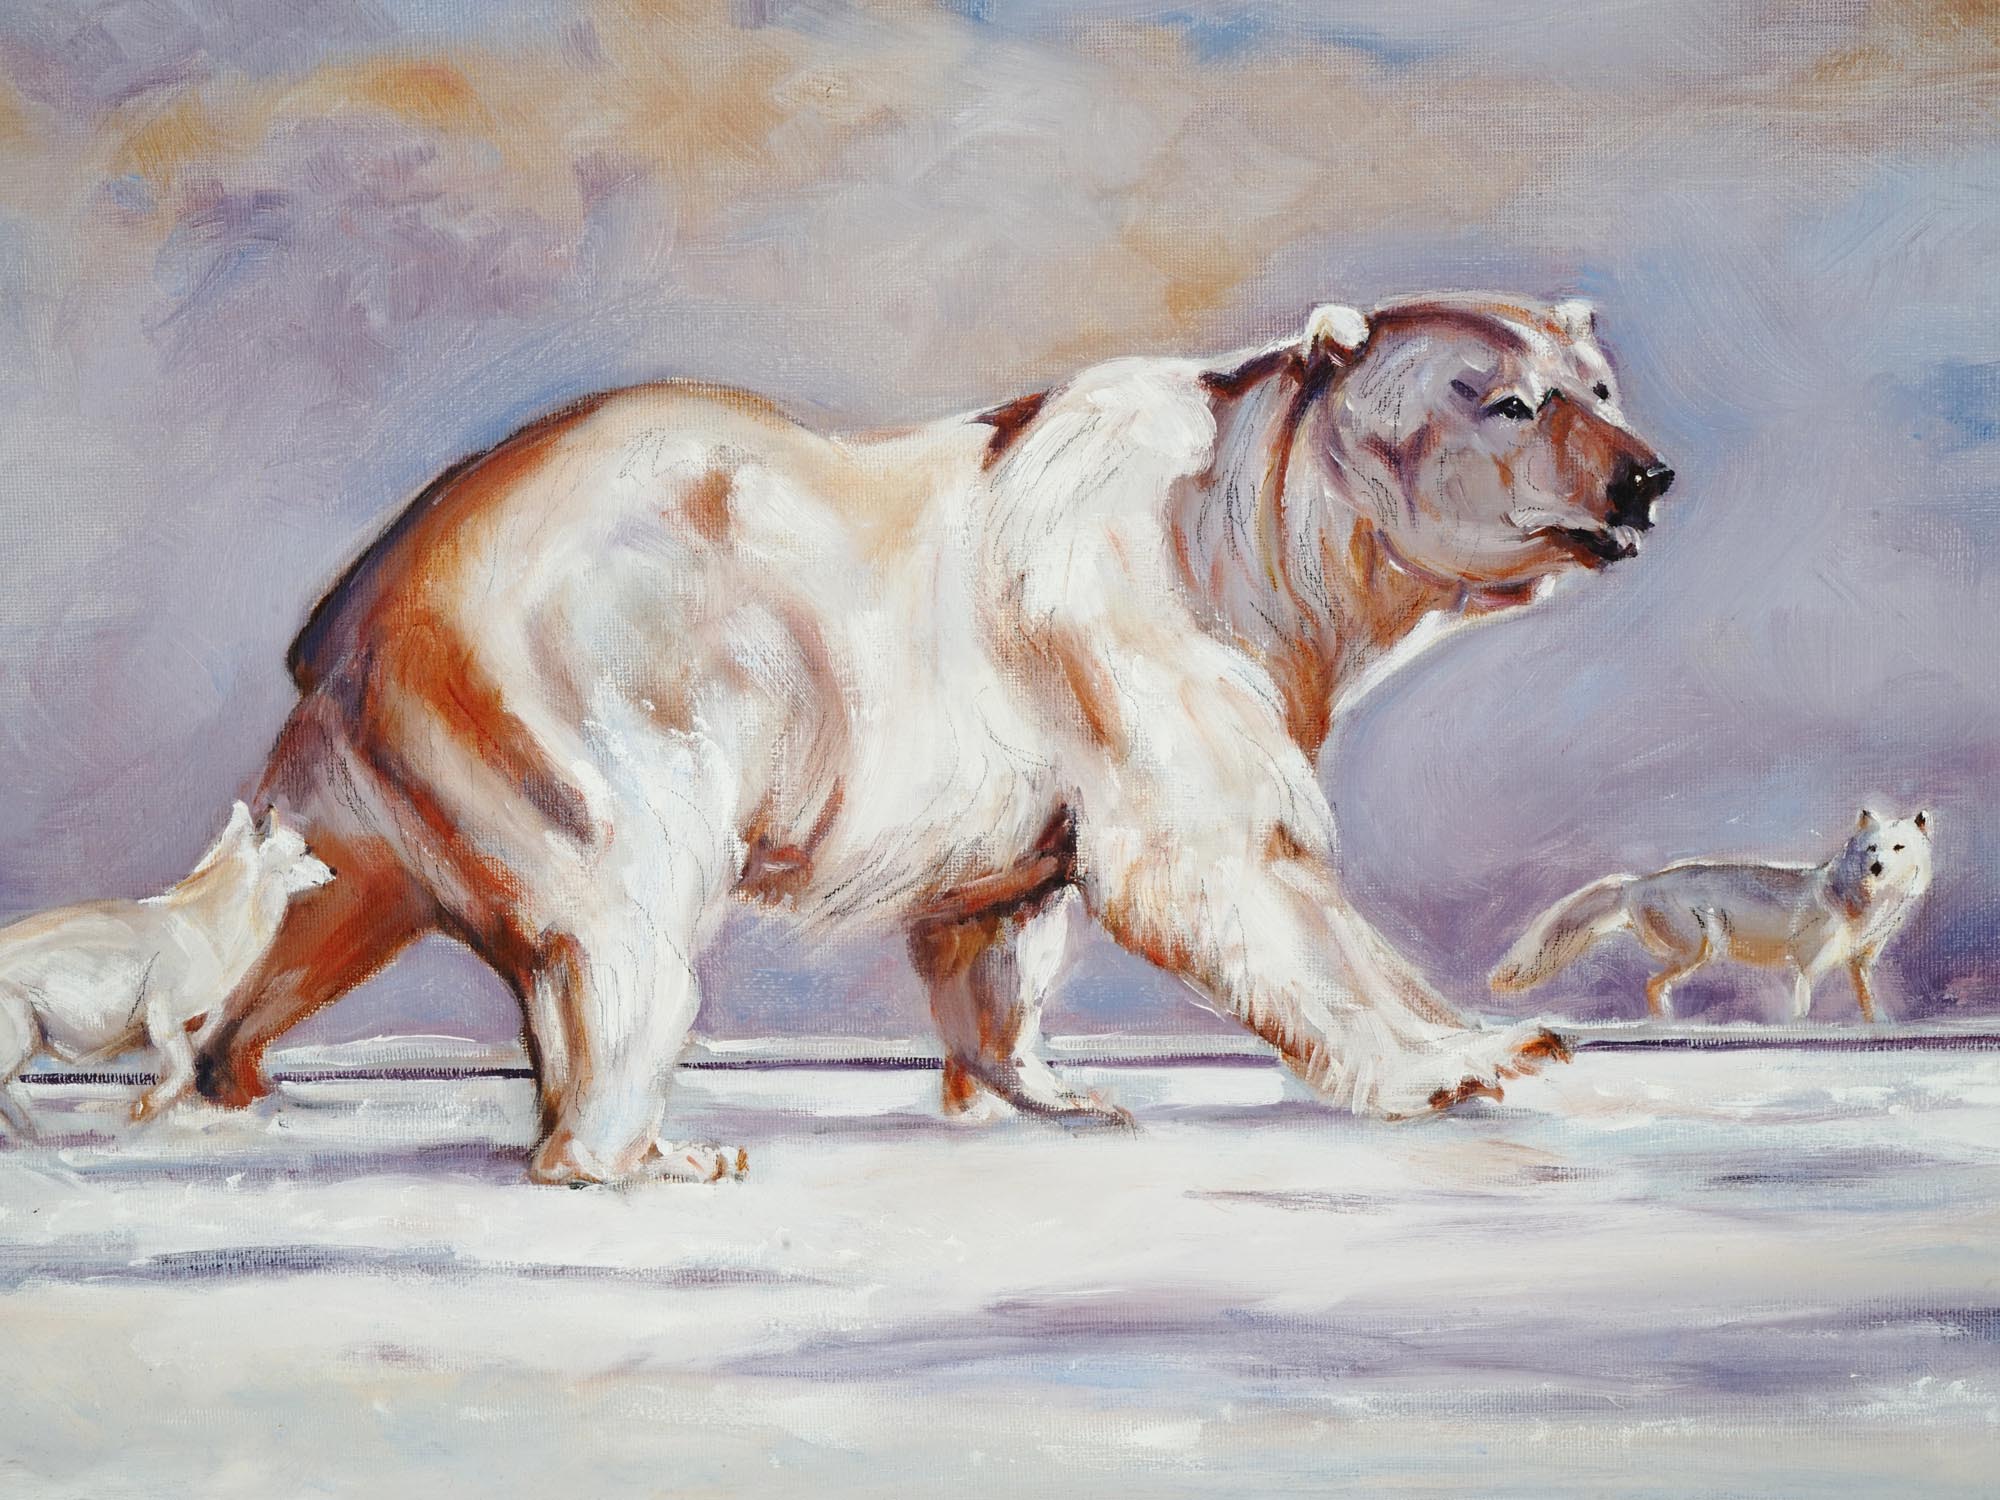 VINTAGE OIL PAINTING OF ARCTIC ANIMALS BY R. GOO PIC-1